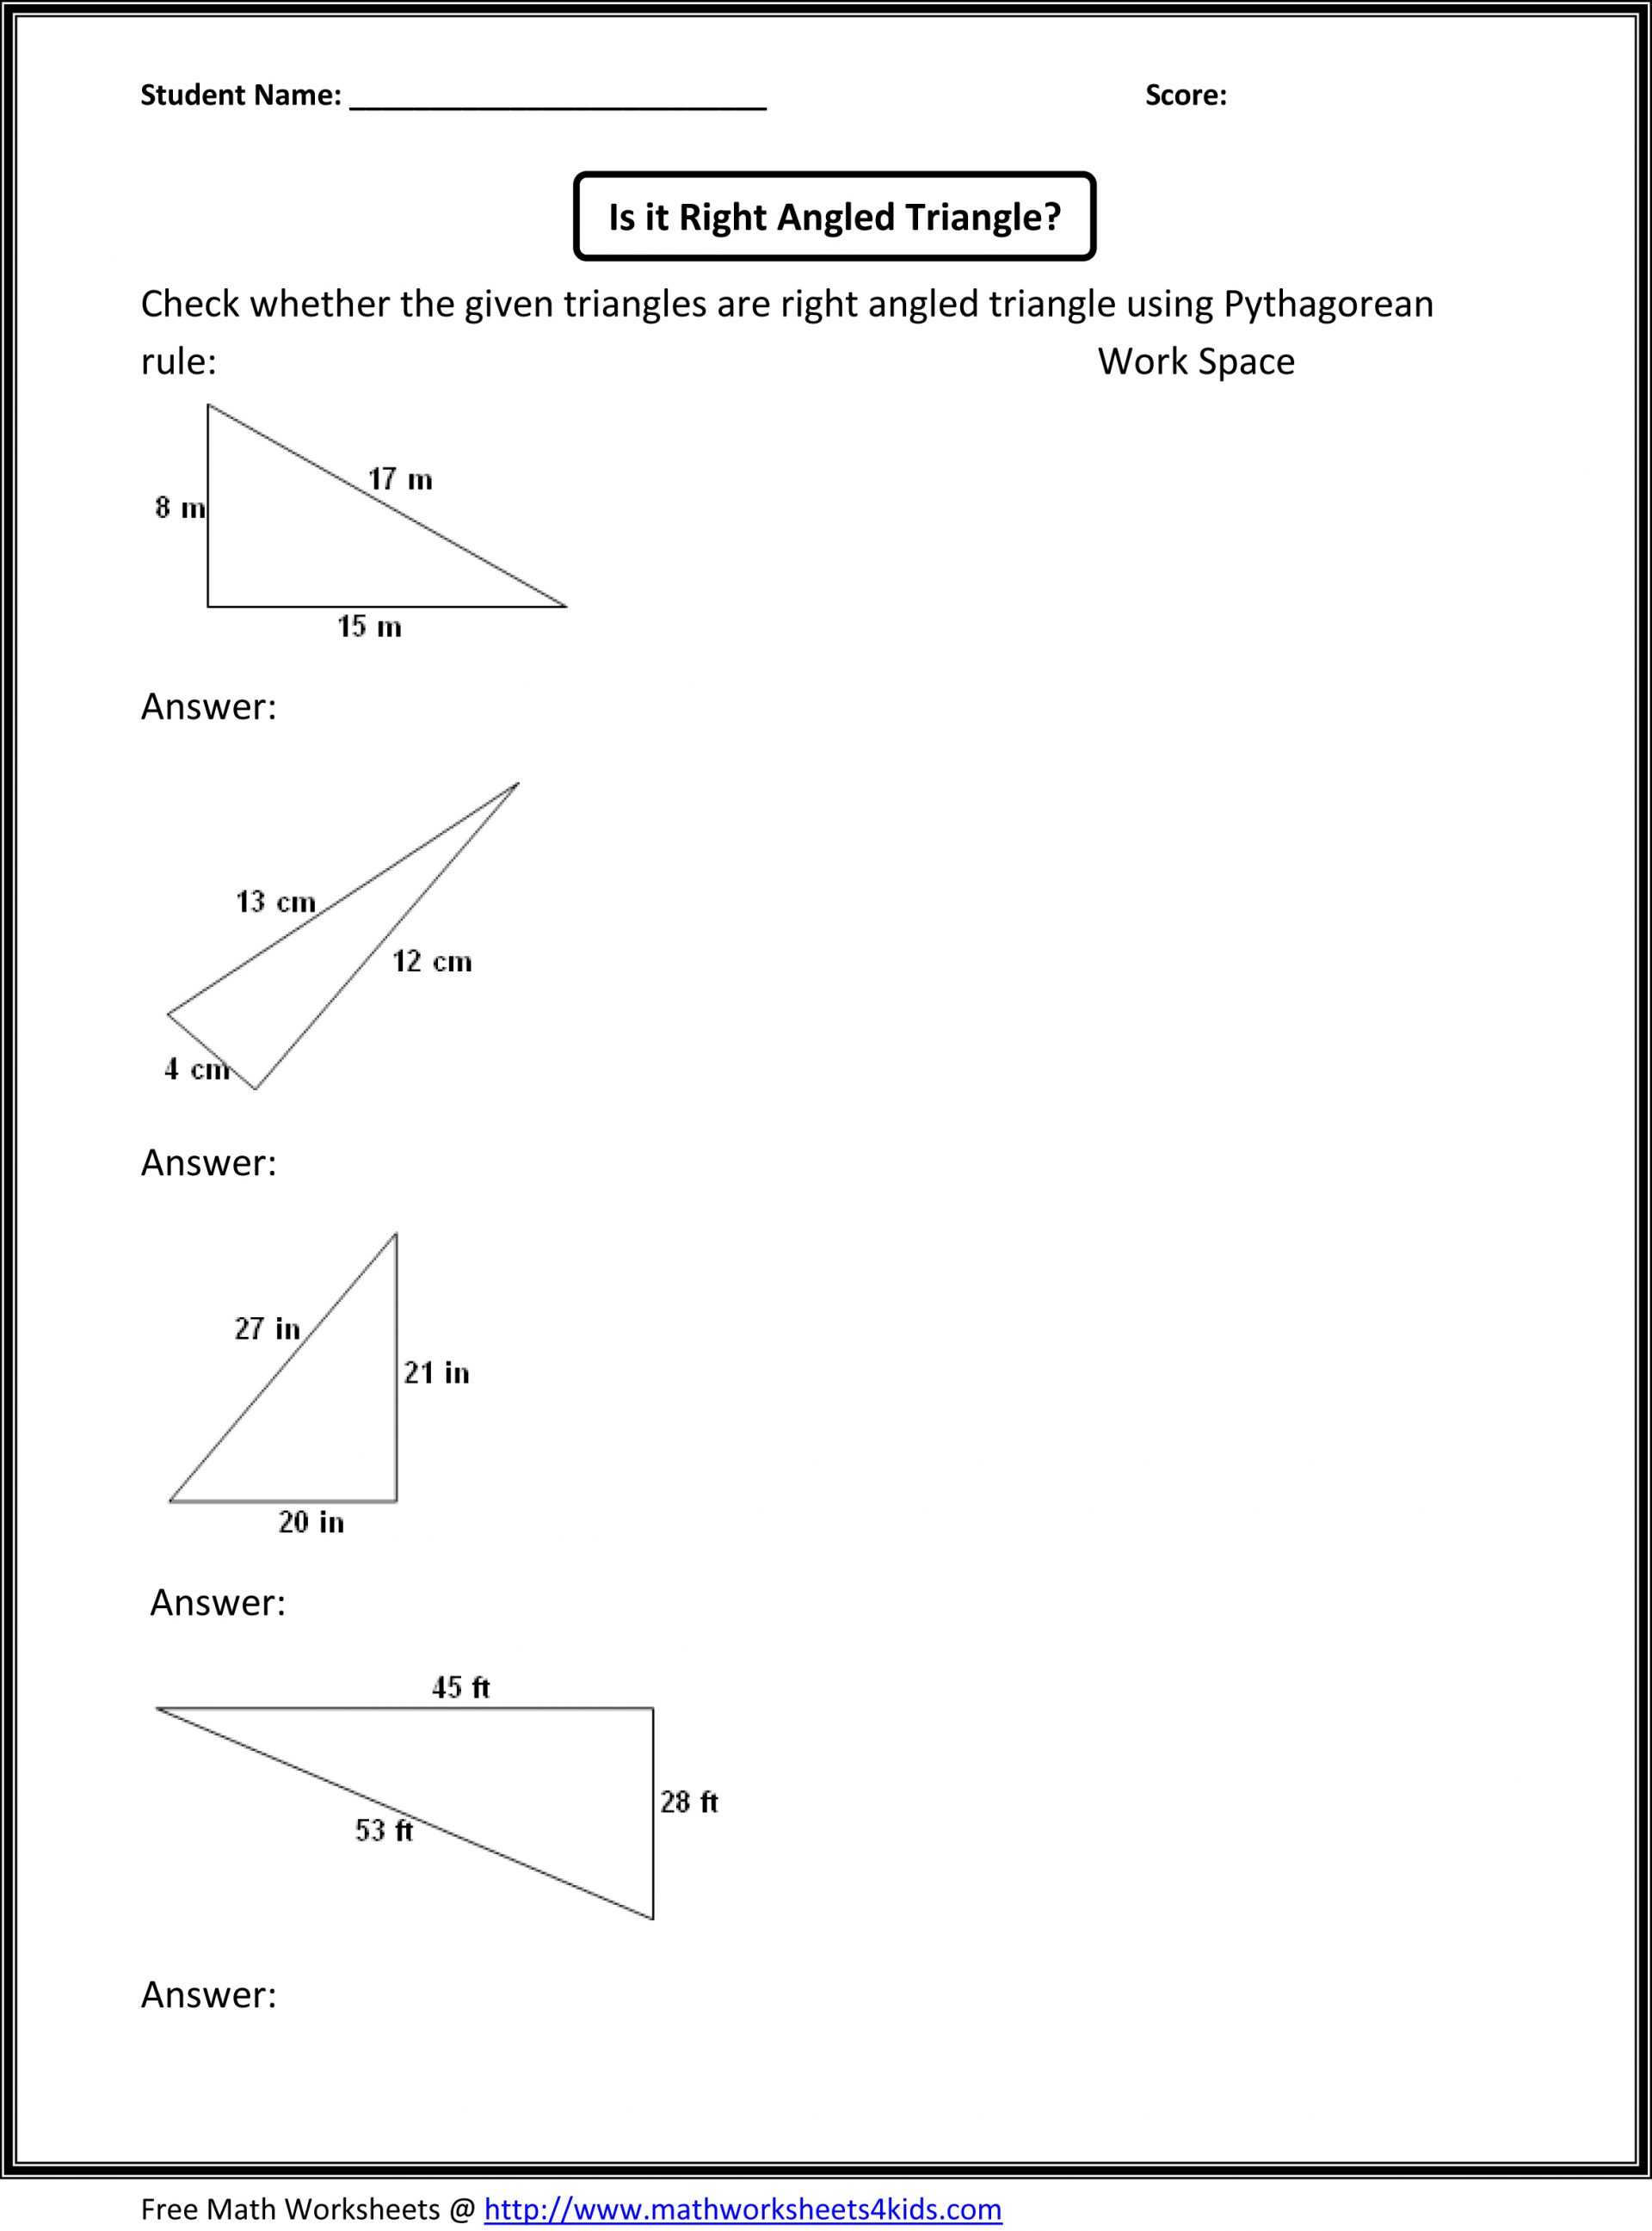 7th Grade Common Core Math Worksheets with Answer Key Along with Collection Of Math Worksheets for Grade 8 Geometry